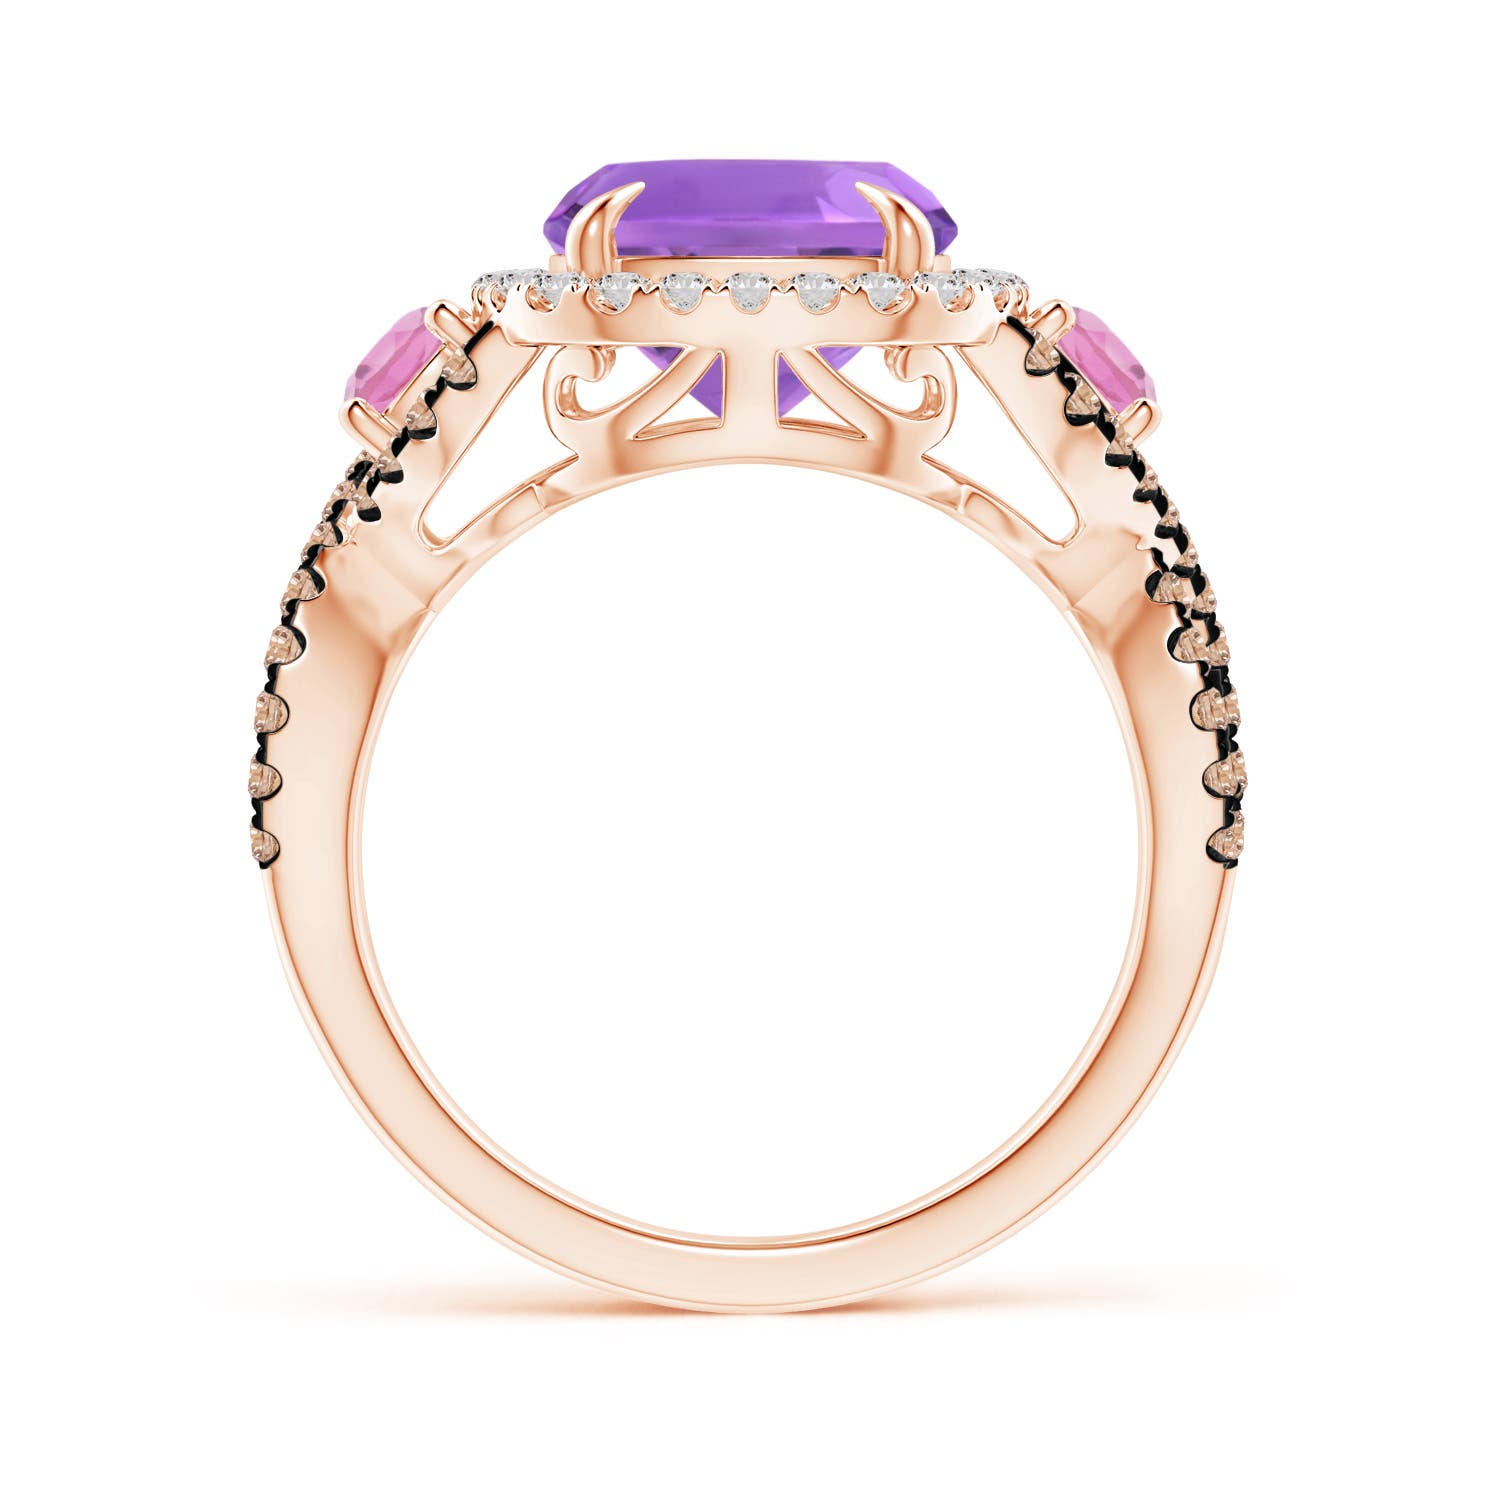 AA - Amethyst / 4.4 CT / 14 KT Rose Gold